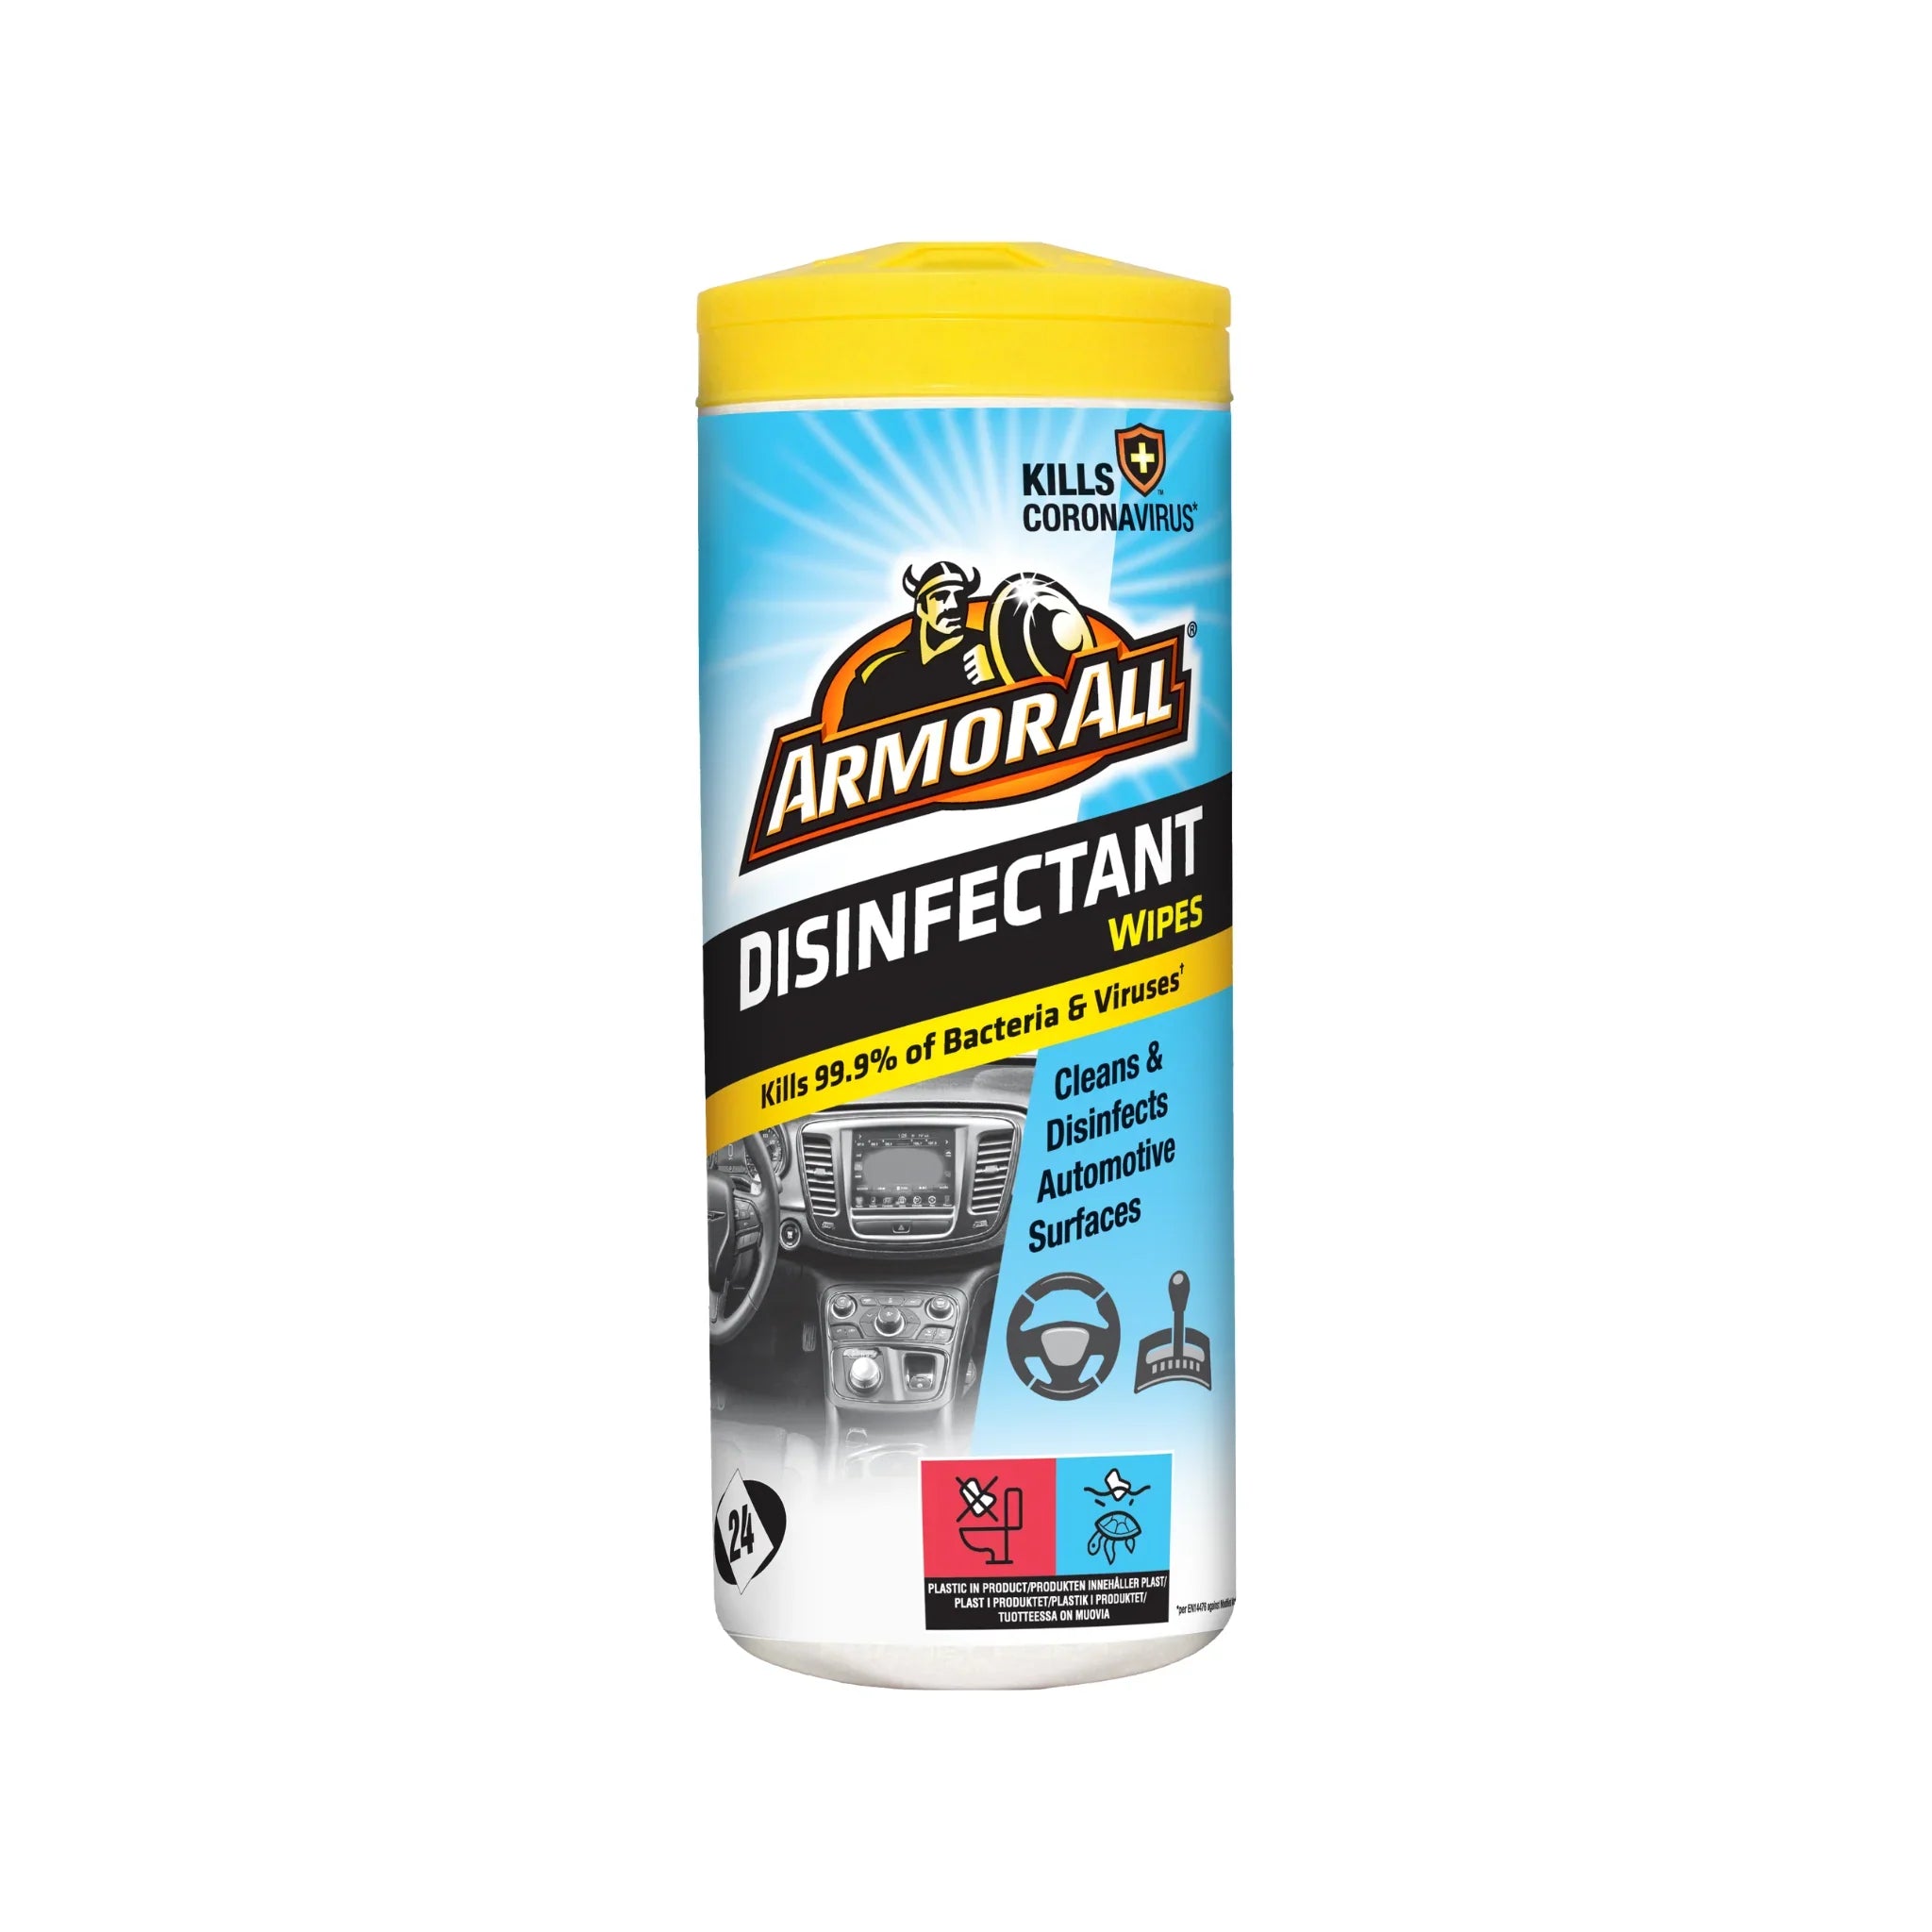 ArmorAll 24ct Disinfectant Wipes